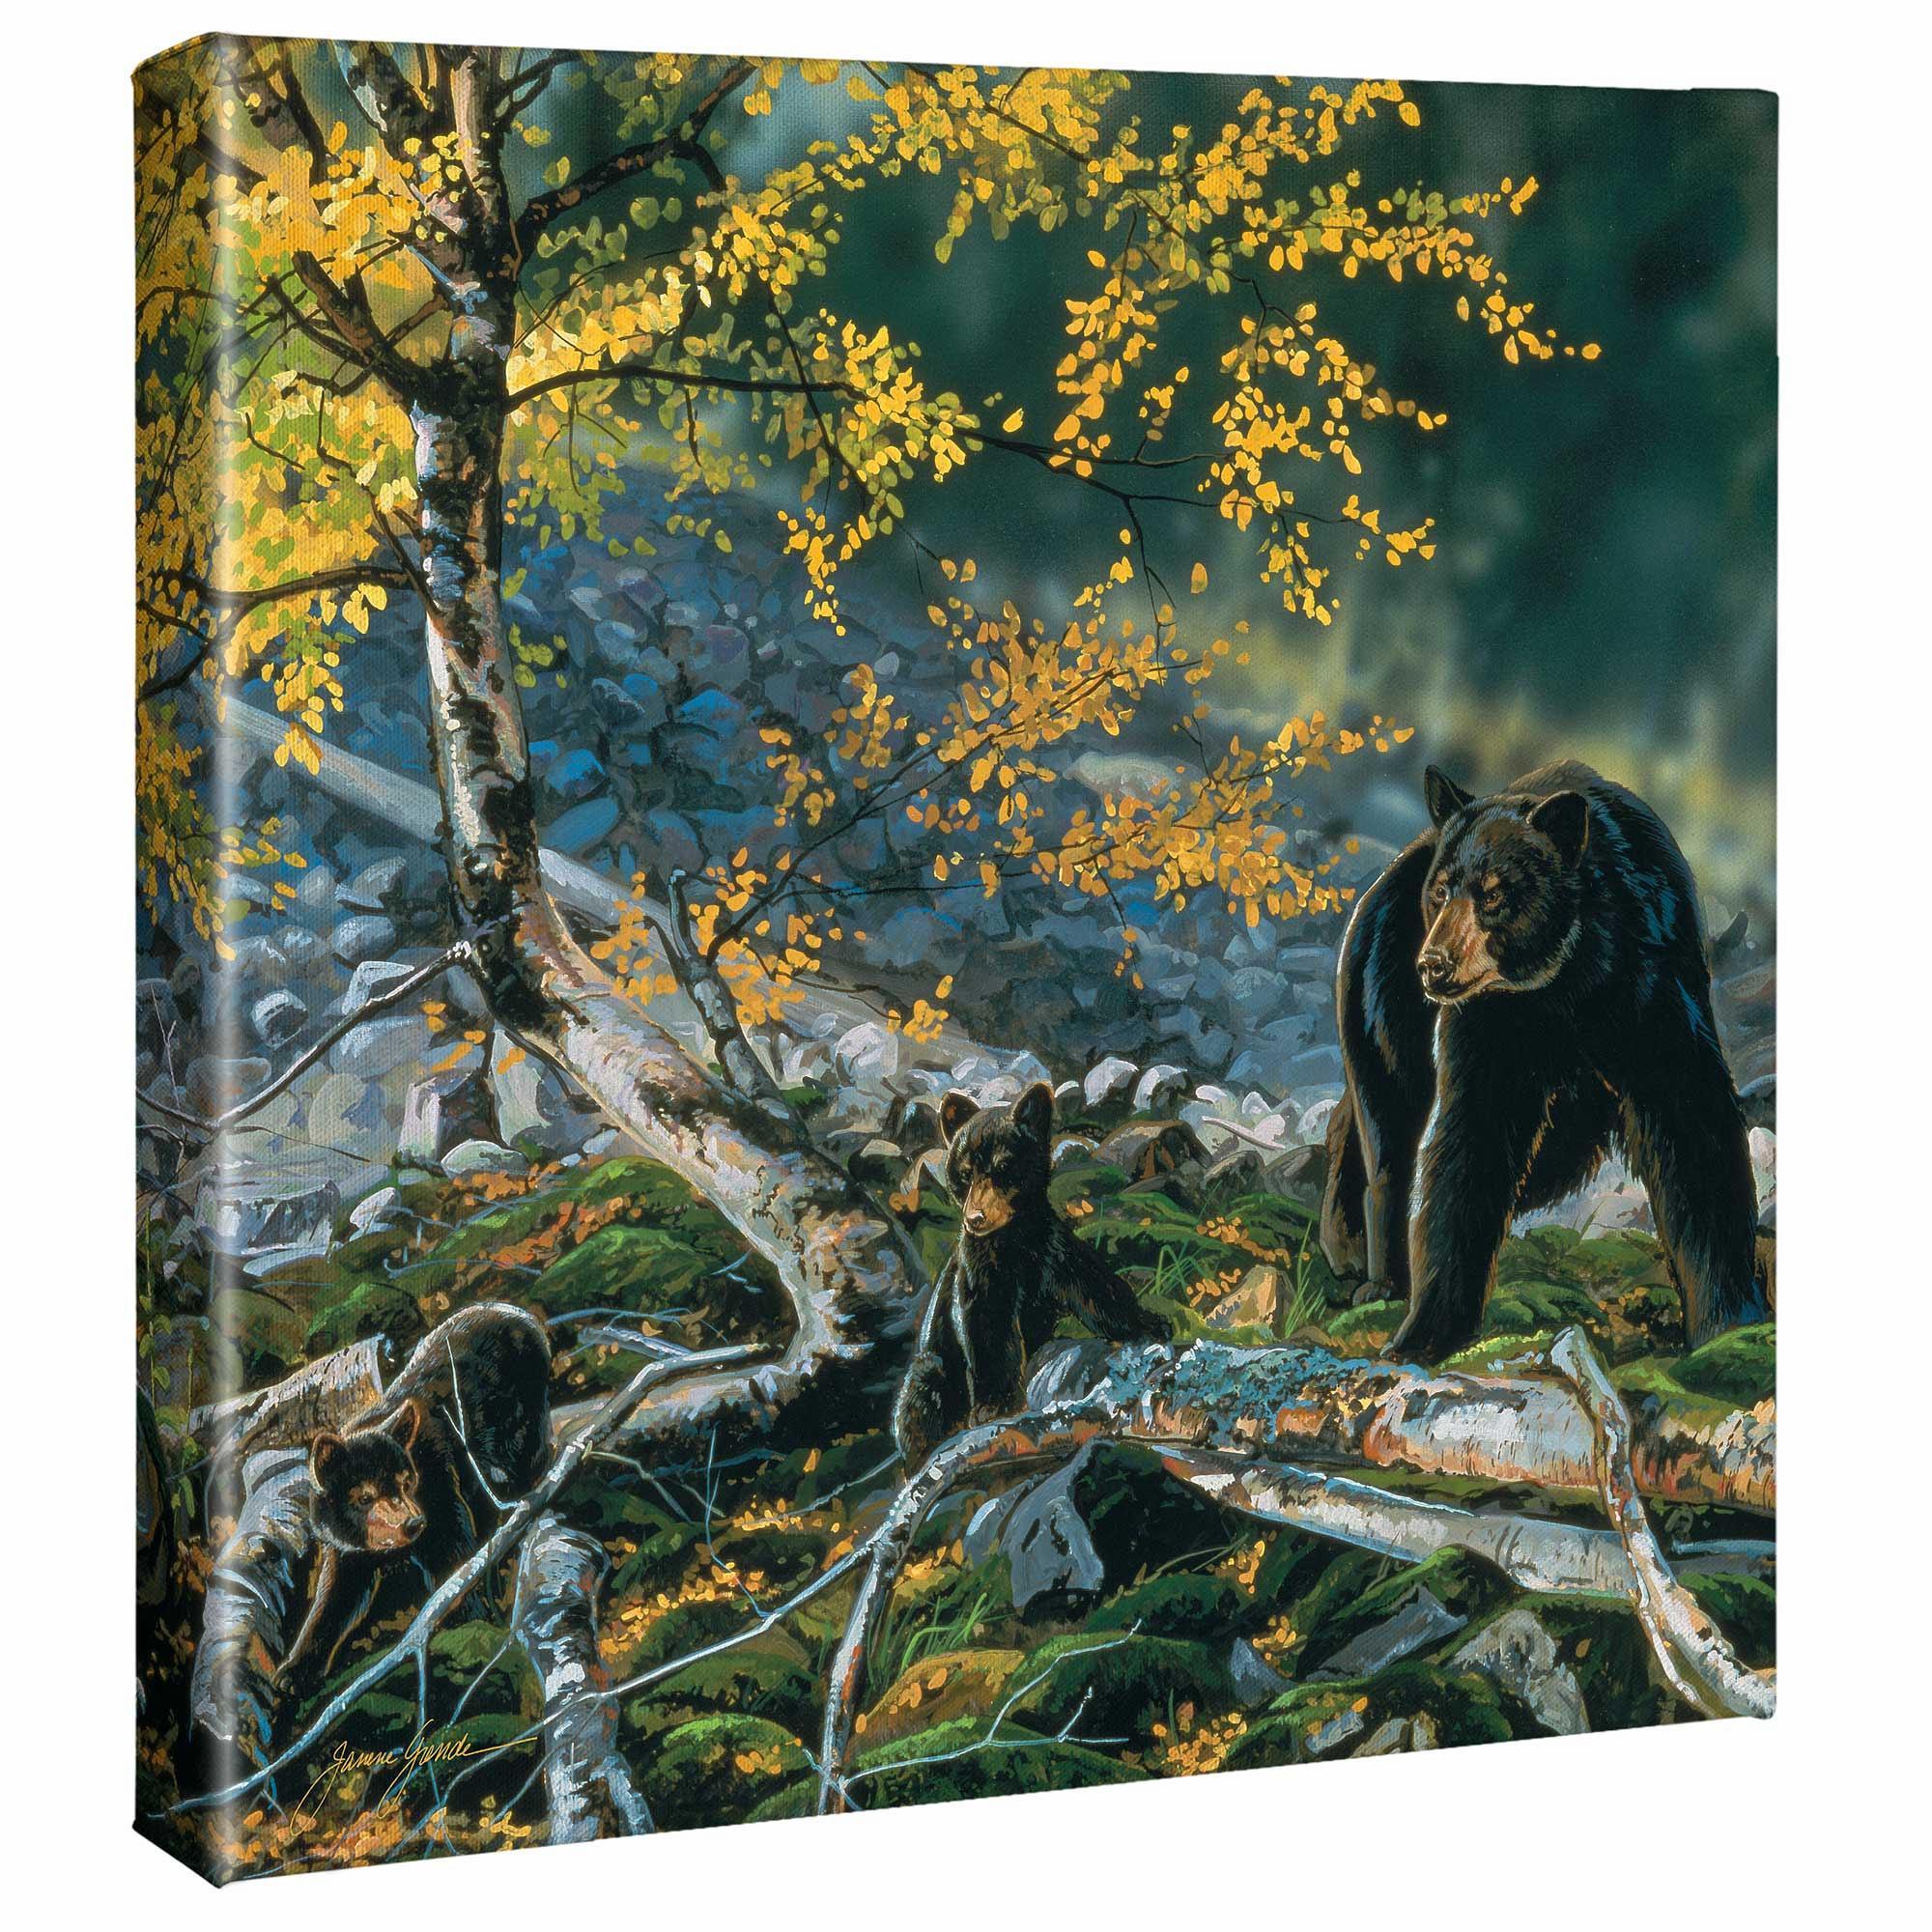 Black Bear and Cub Gallery Wrapped Canvas - Wild Wings